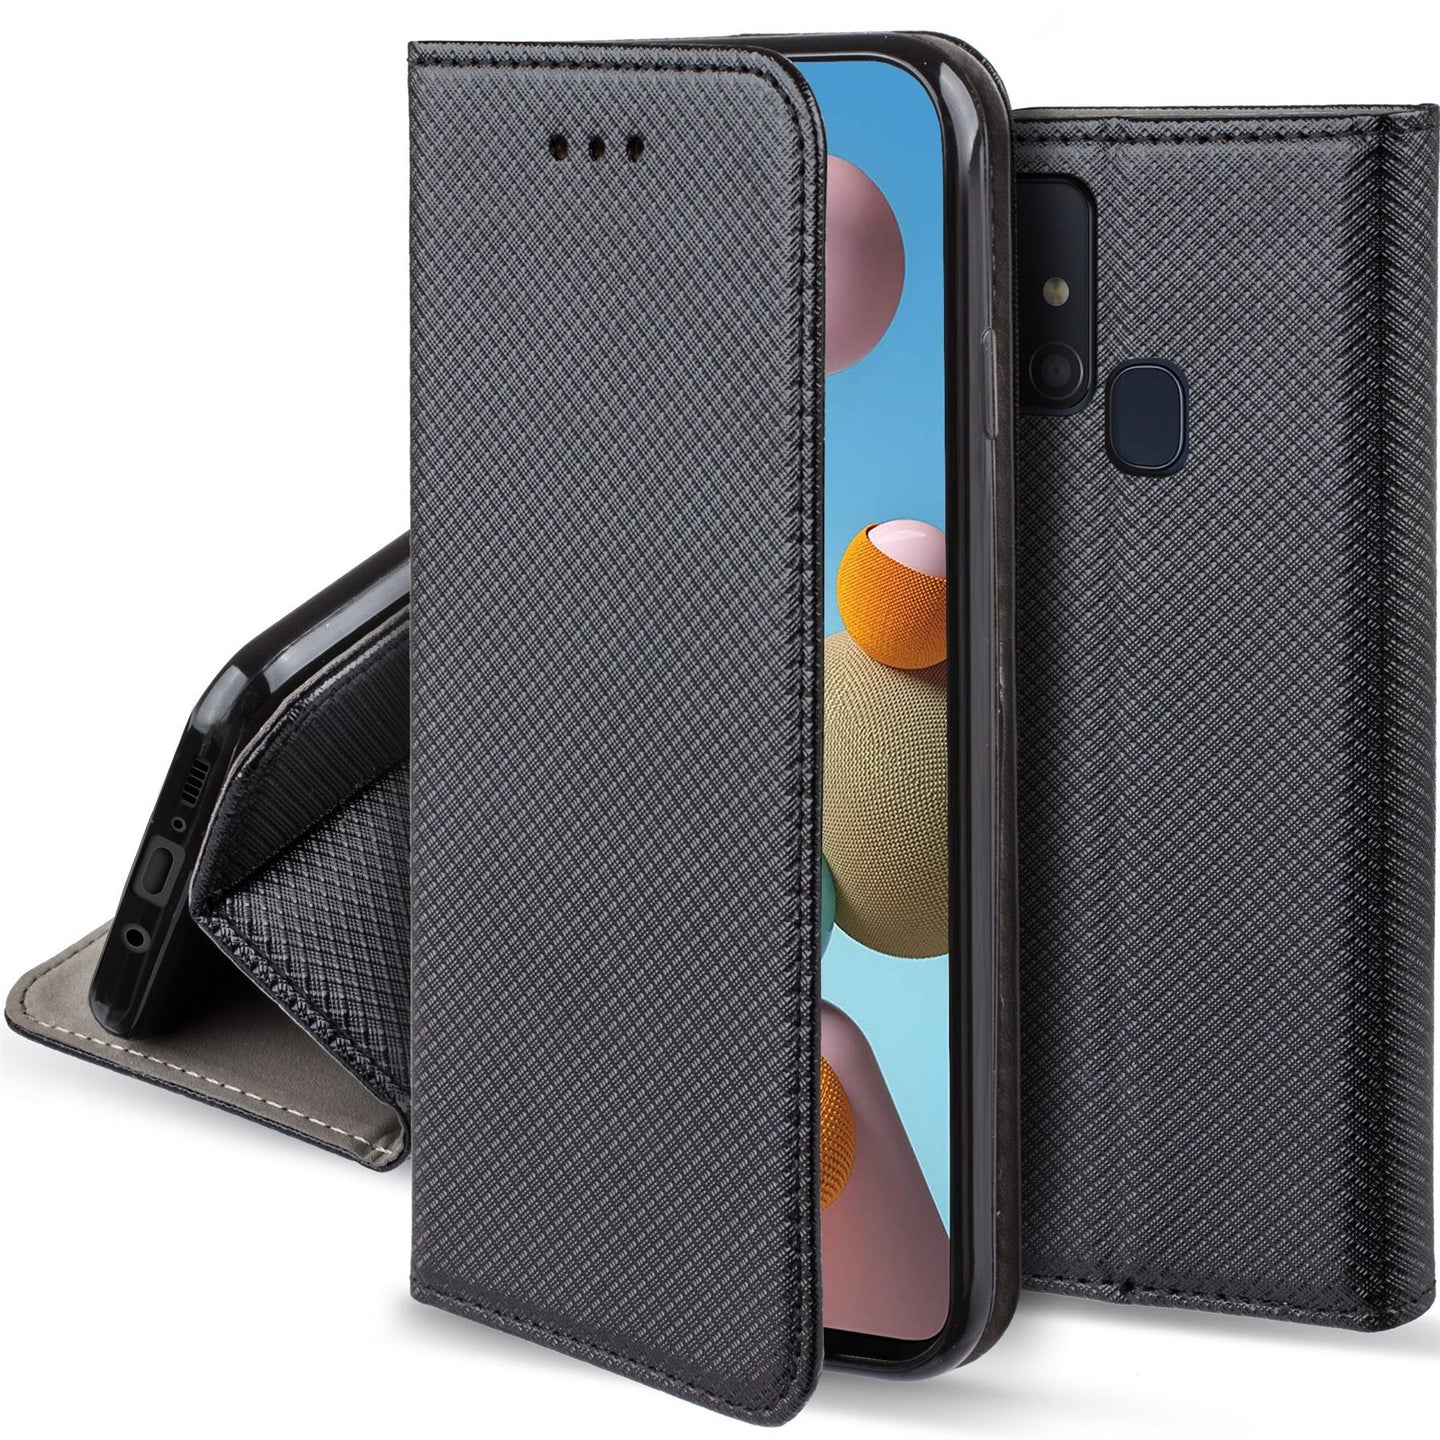 Moozy Case Flip Cover for Samsung A21s, Black - Smart Magnetic Flip Case with Card Holder and Stand